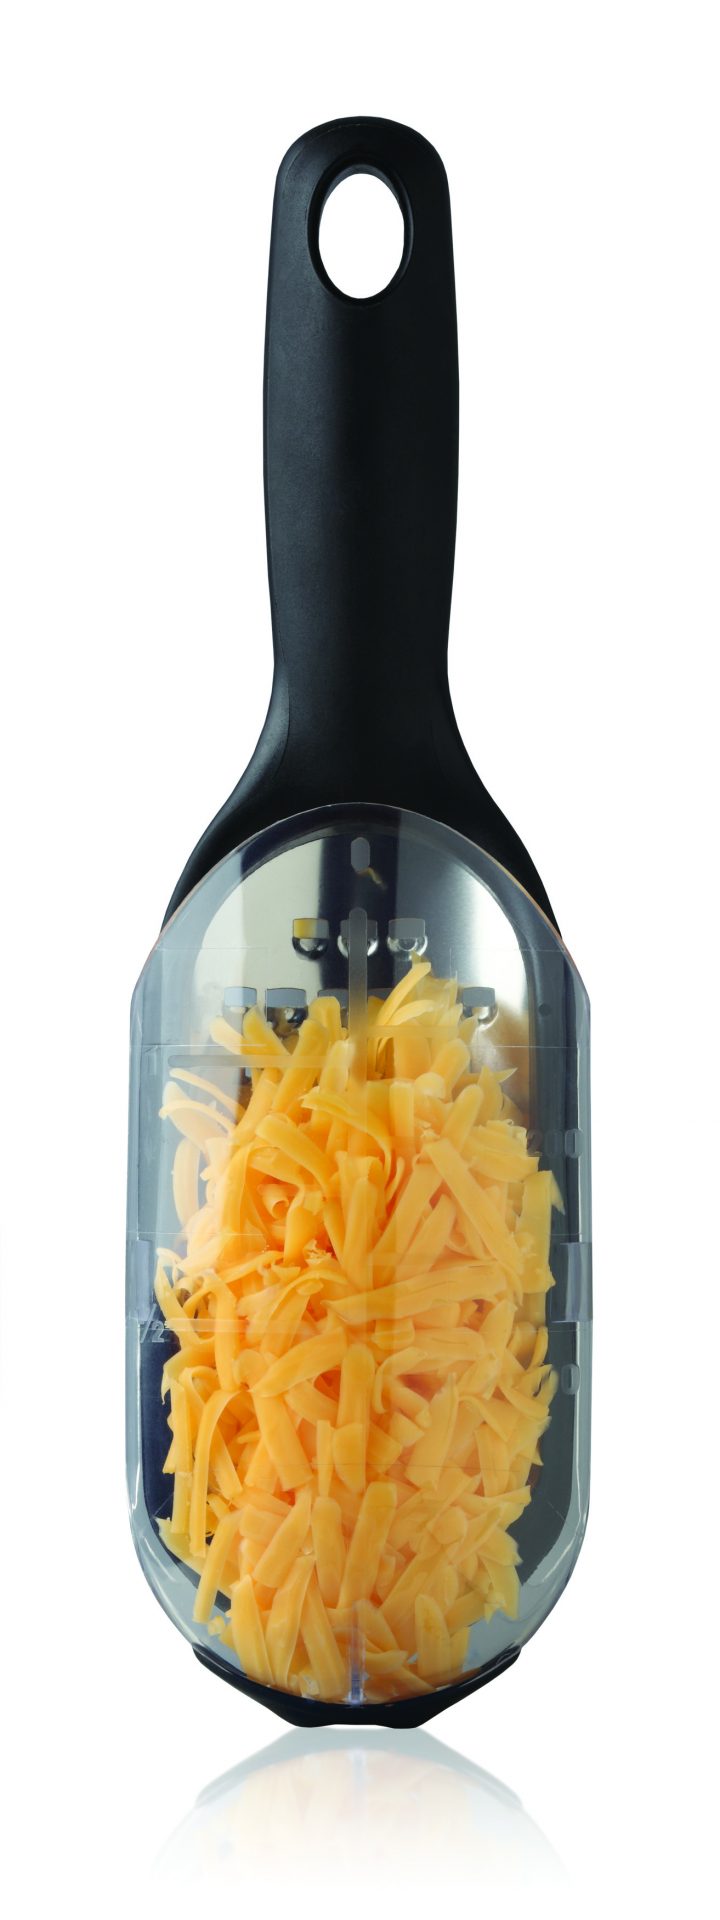 15303 – Extra Series Coarse Grater Black with food LS3